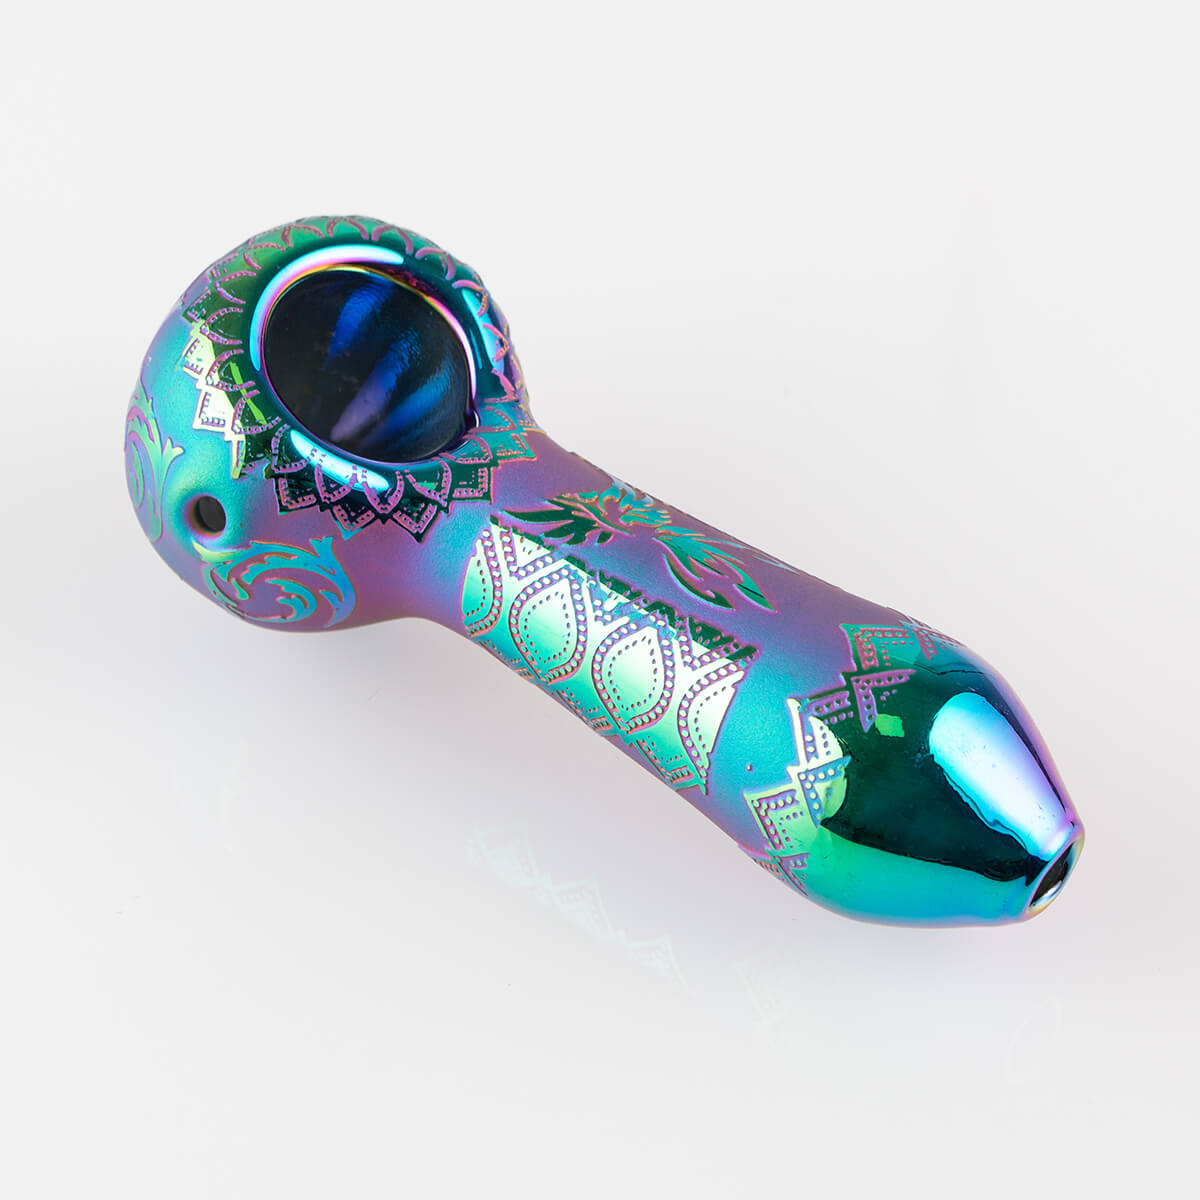 BooGlass Artistic Hand Pipes